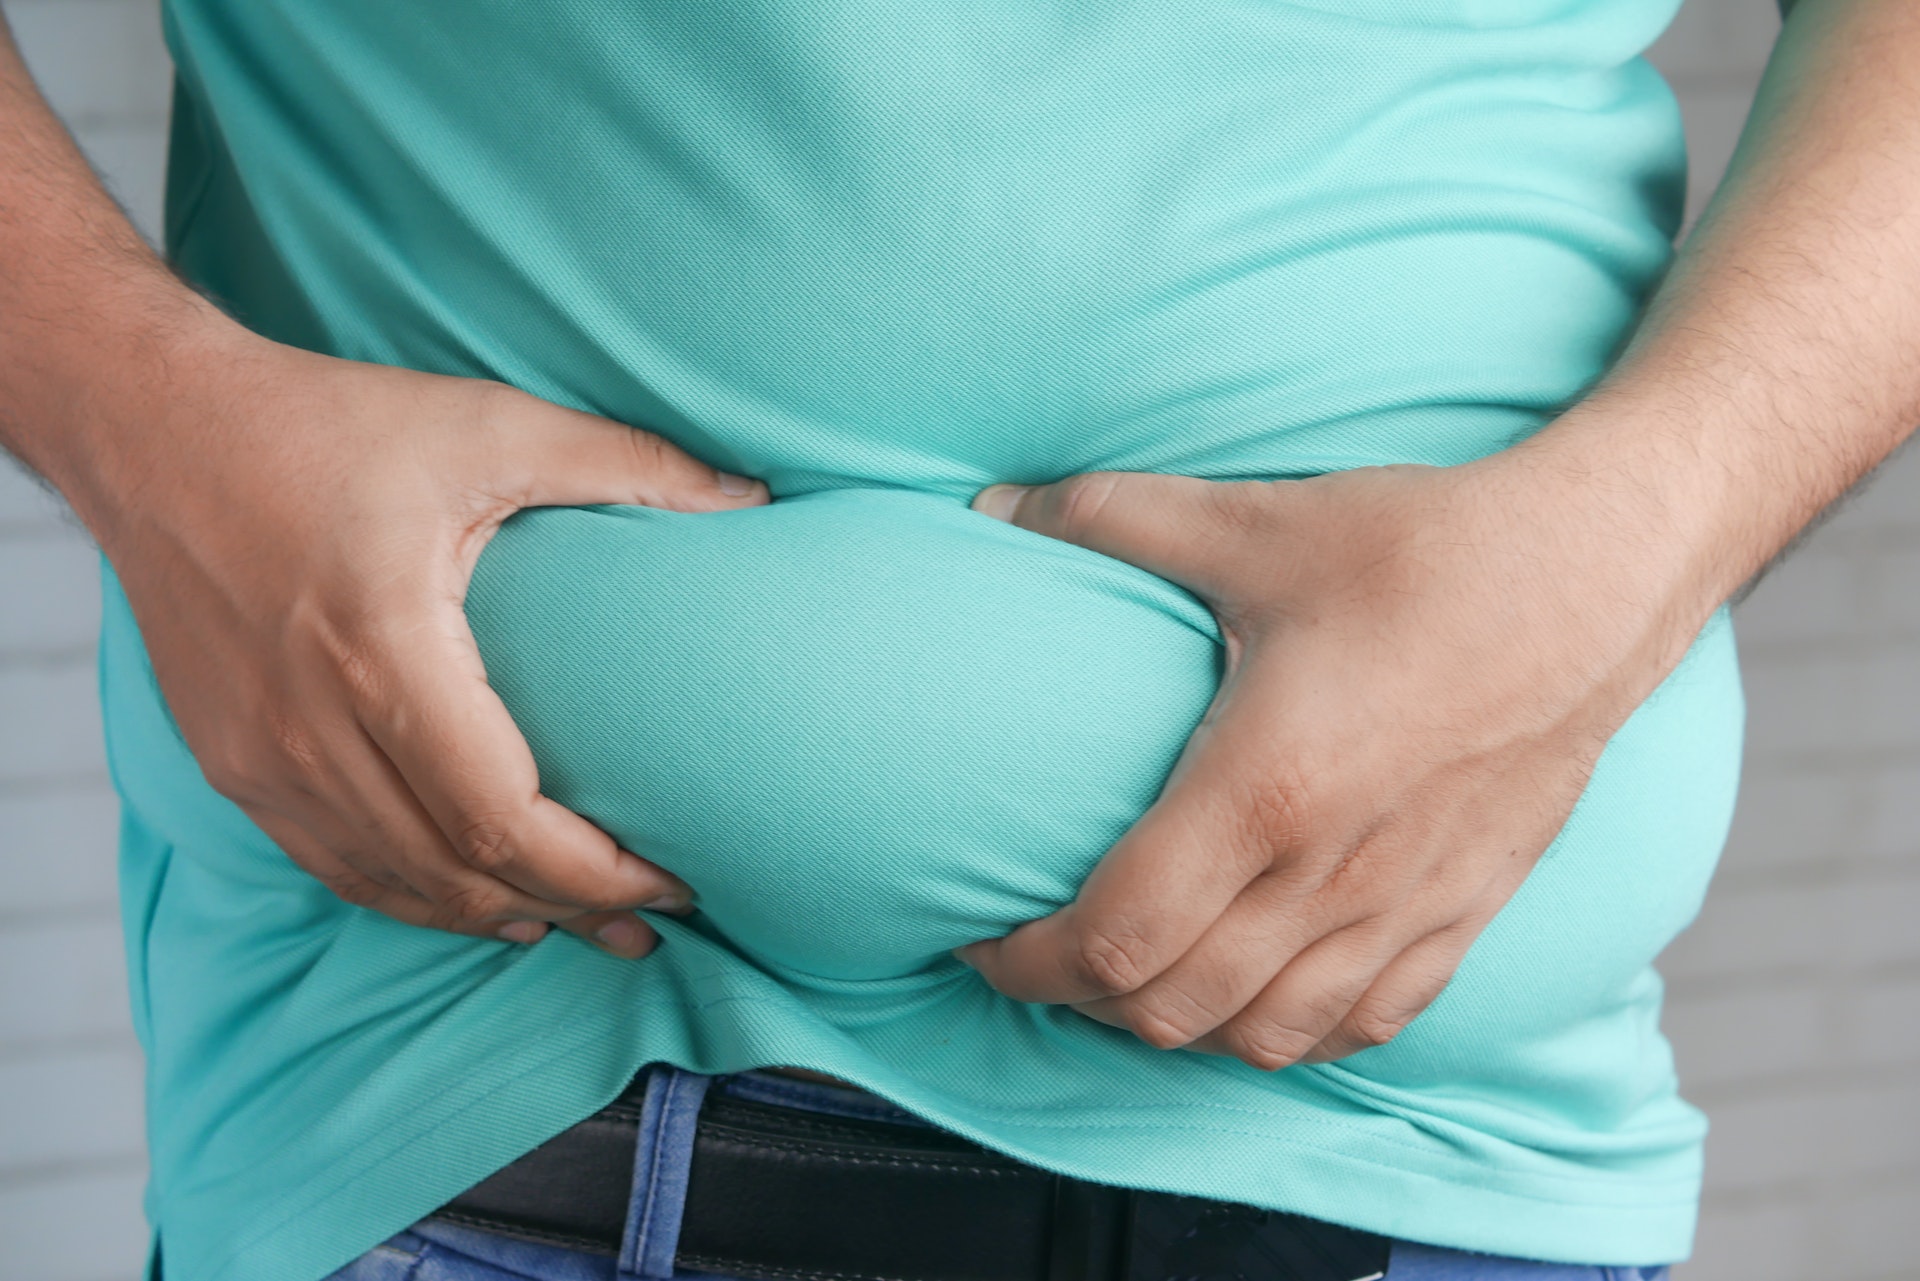 A person holding his belly fat | Source: Pexels